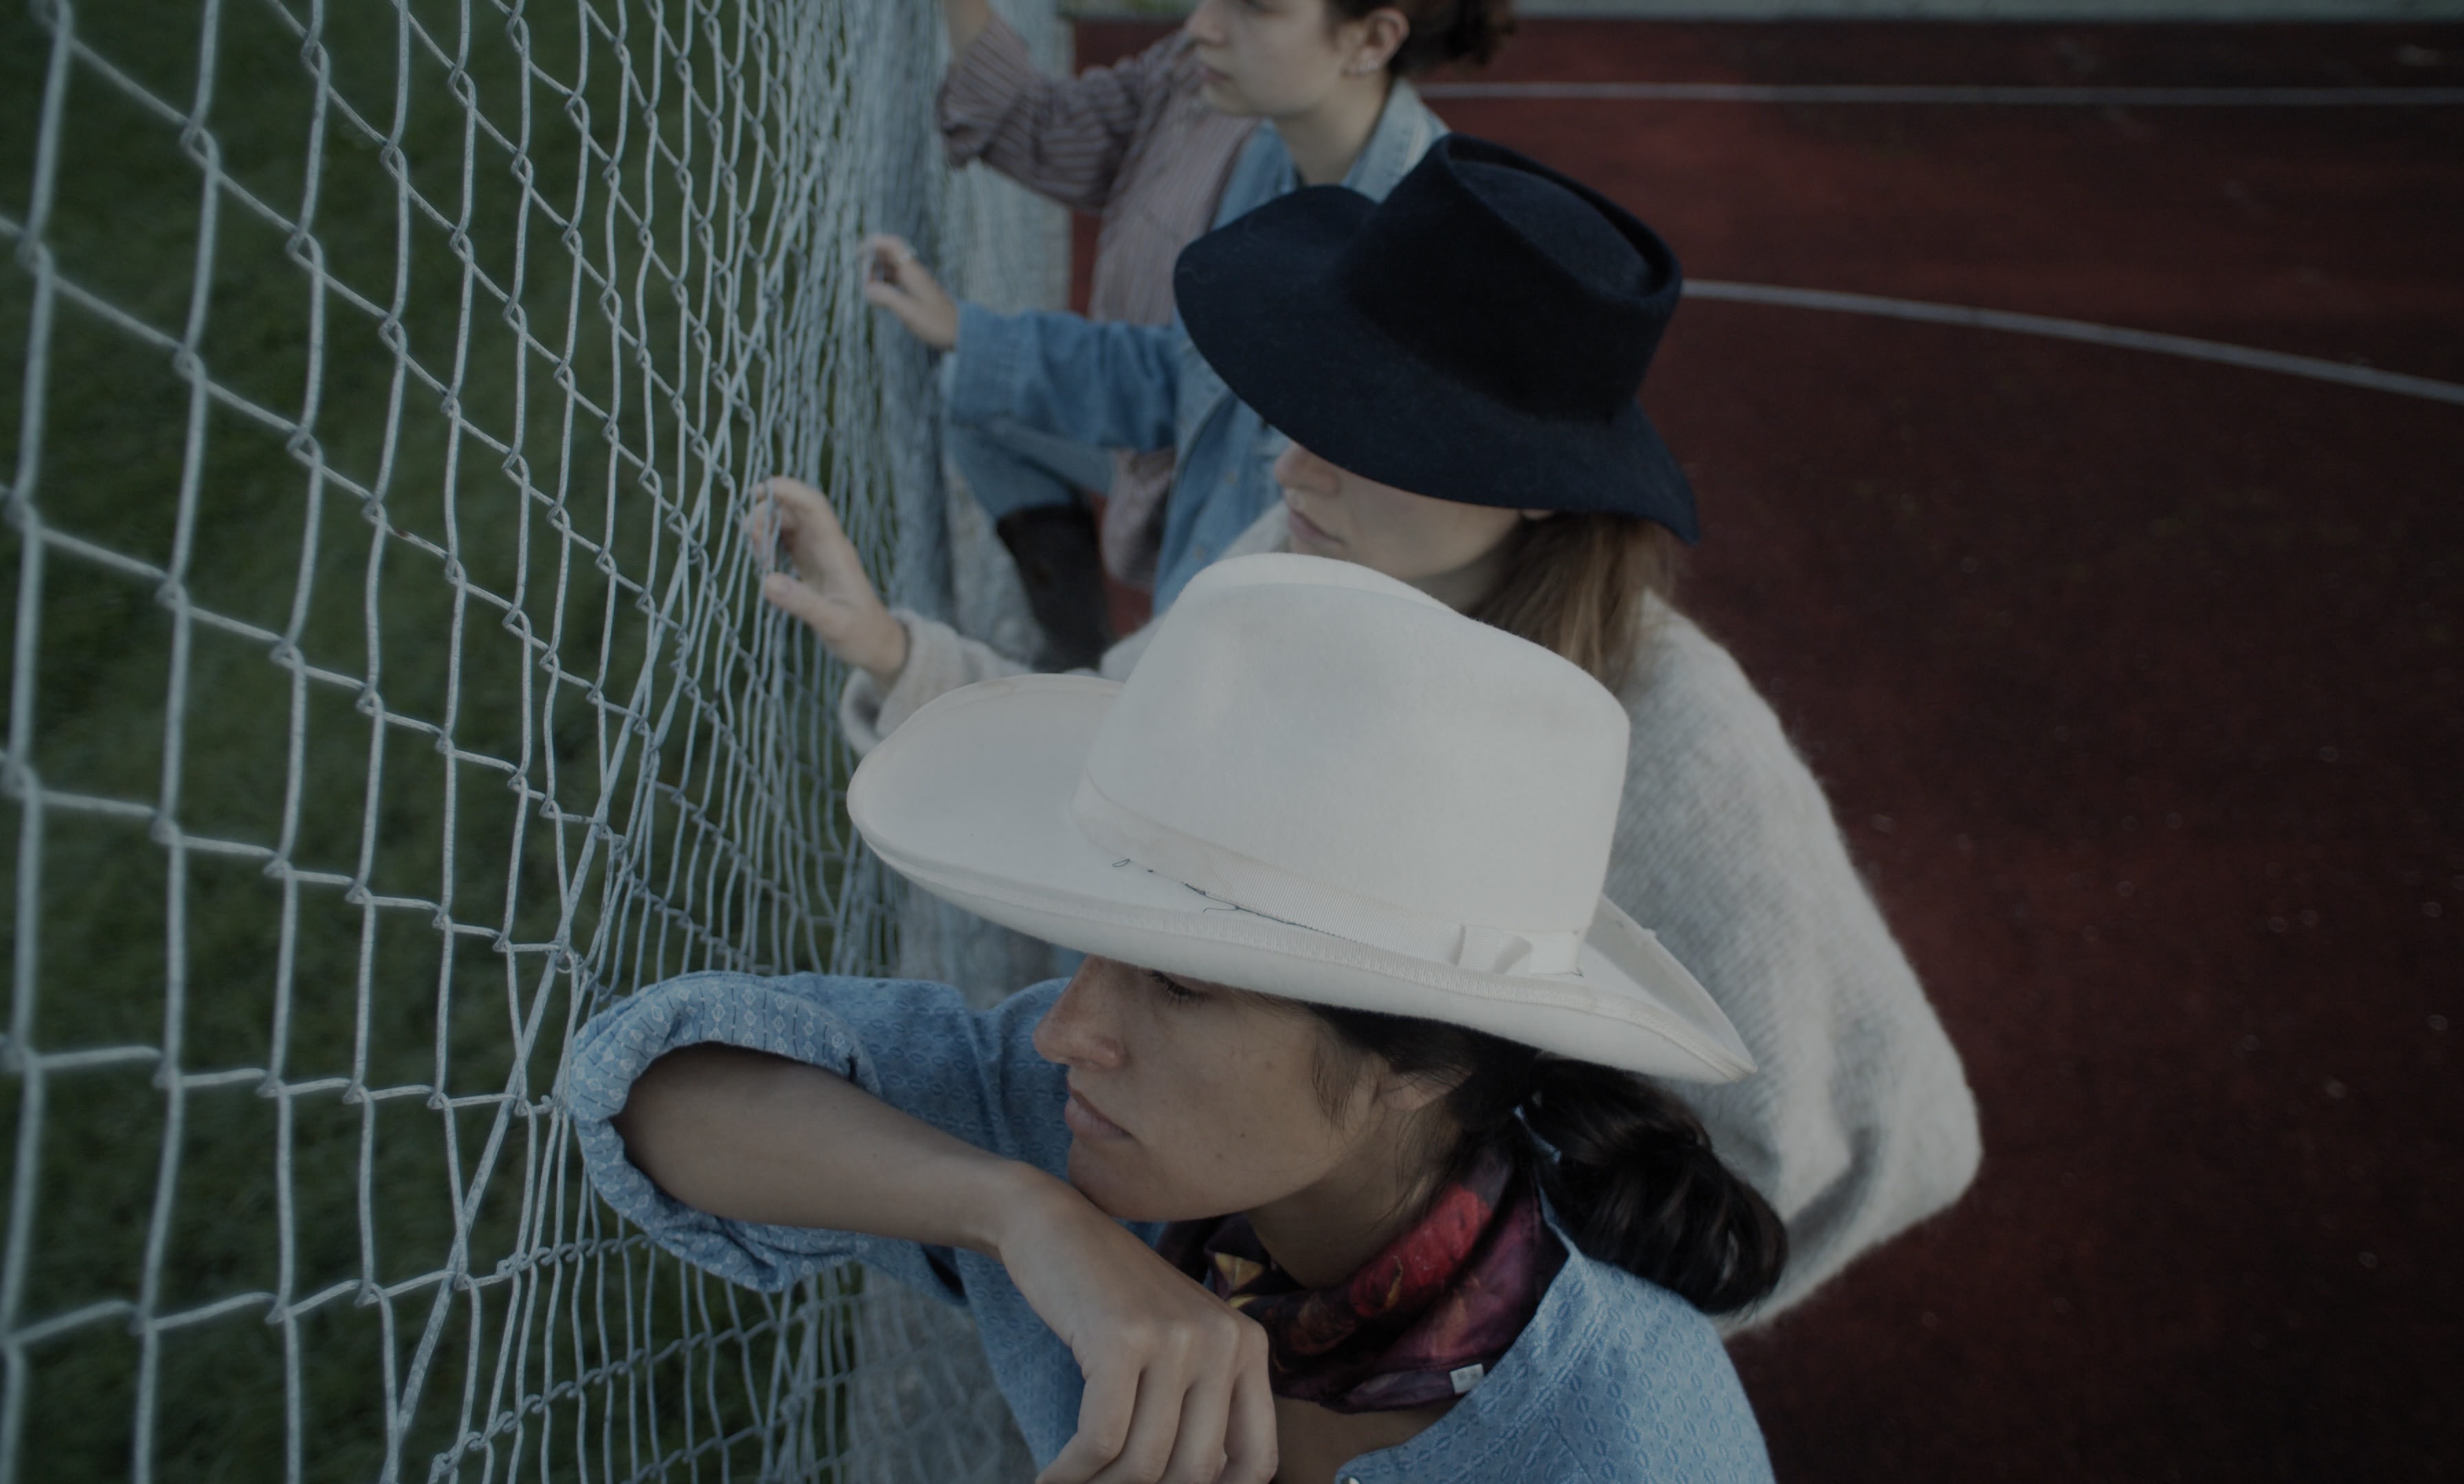 Four women, seen from above, leaning against a chain link fence. They are wearing cowboy hats.